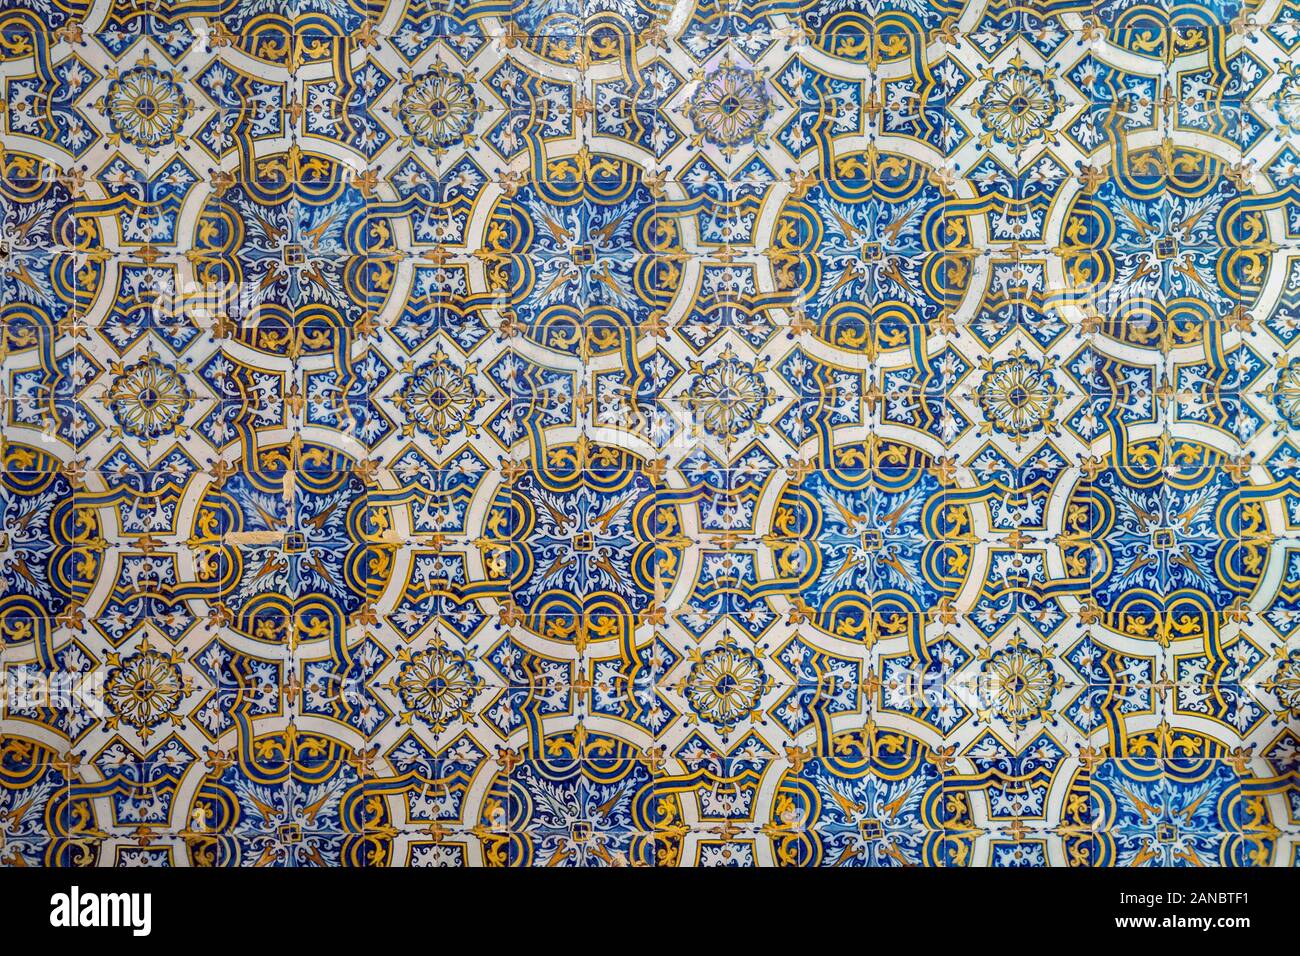 Original old blue tiles called azulejos in Coimbra, Portugal Stock Photo